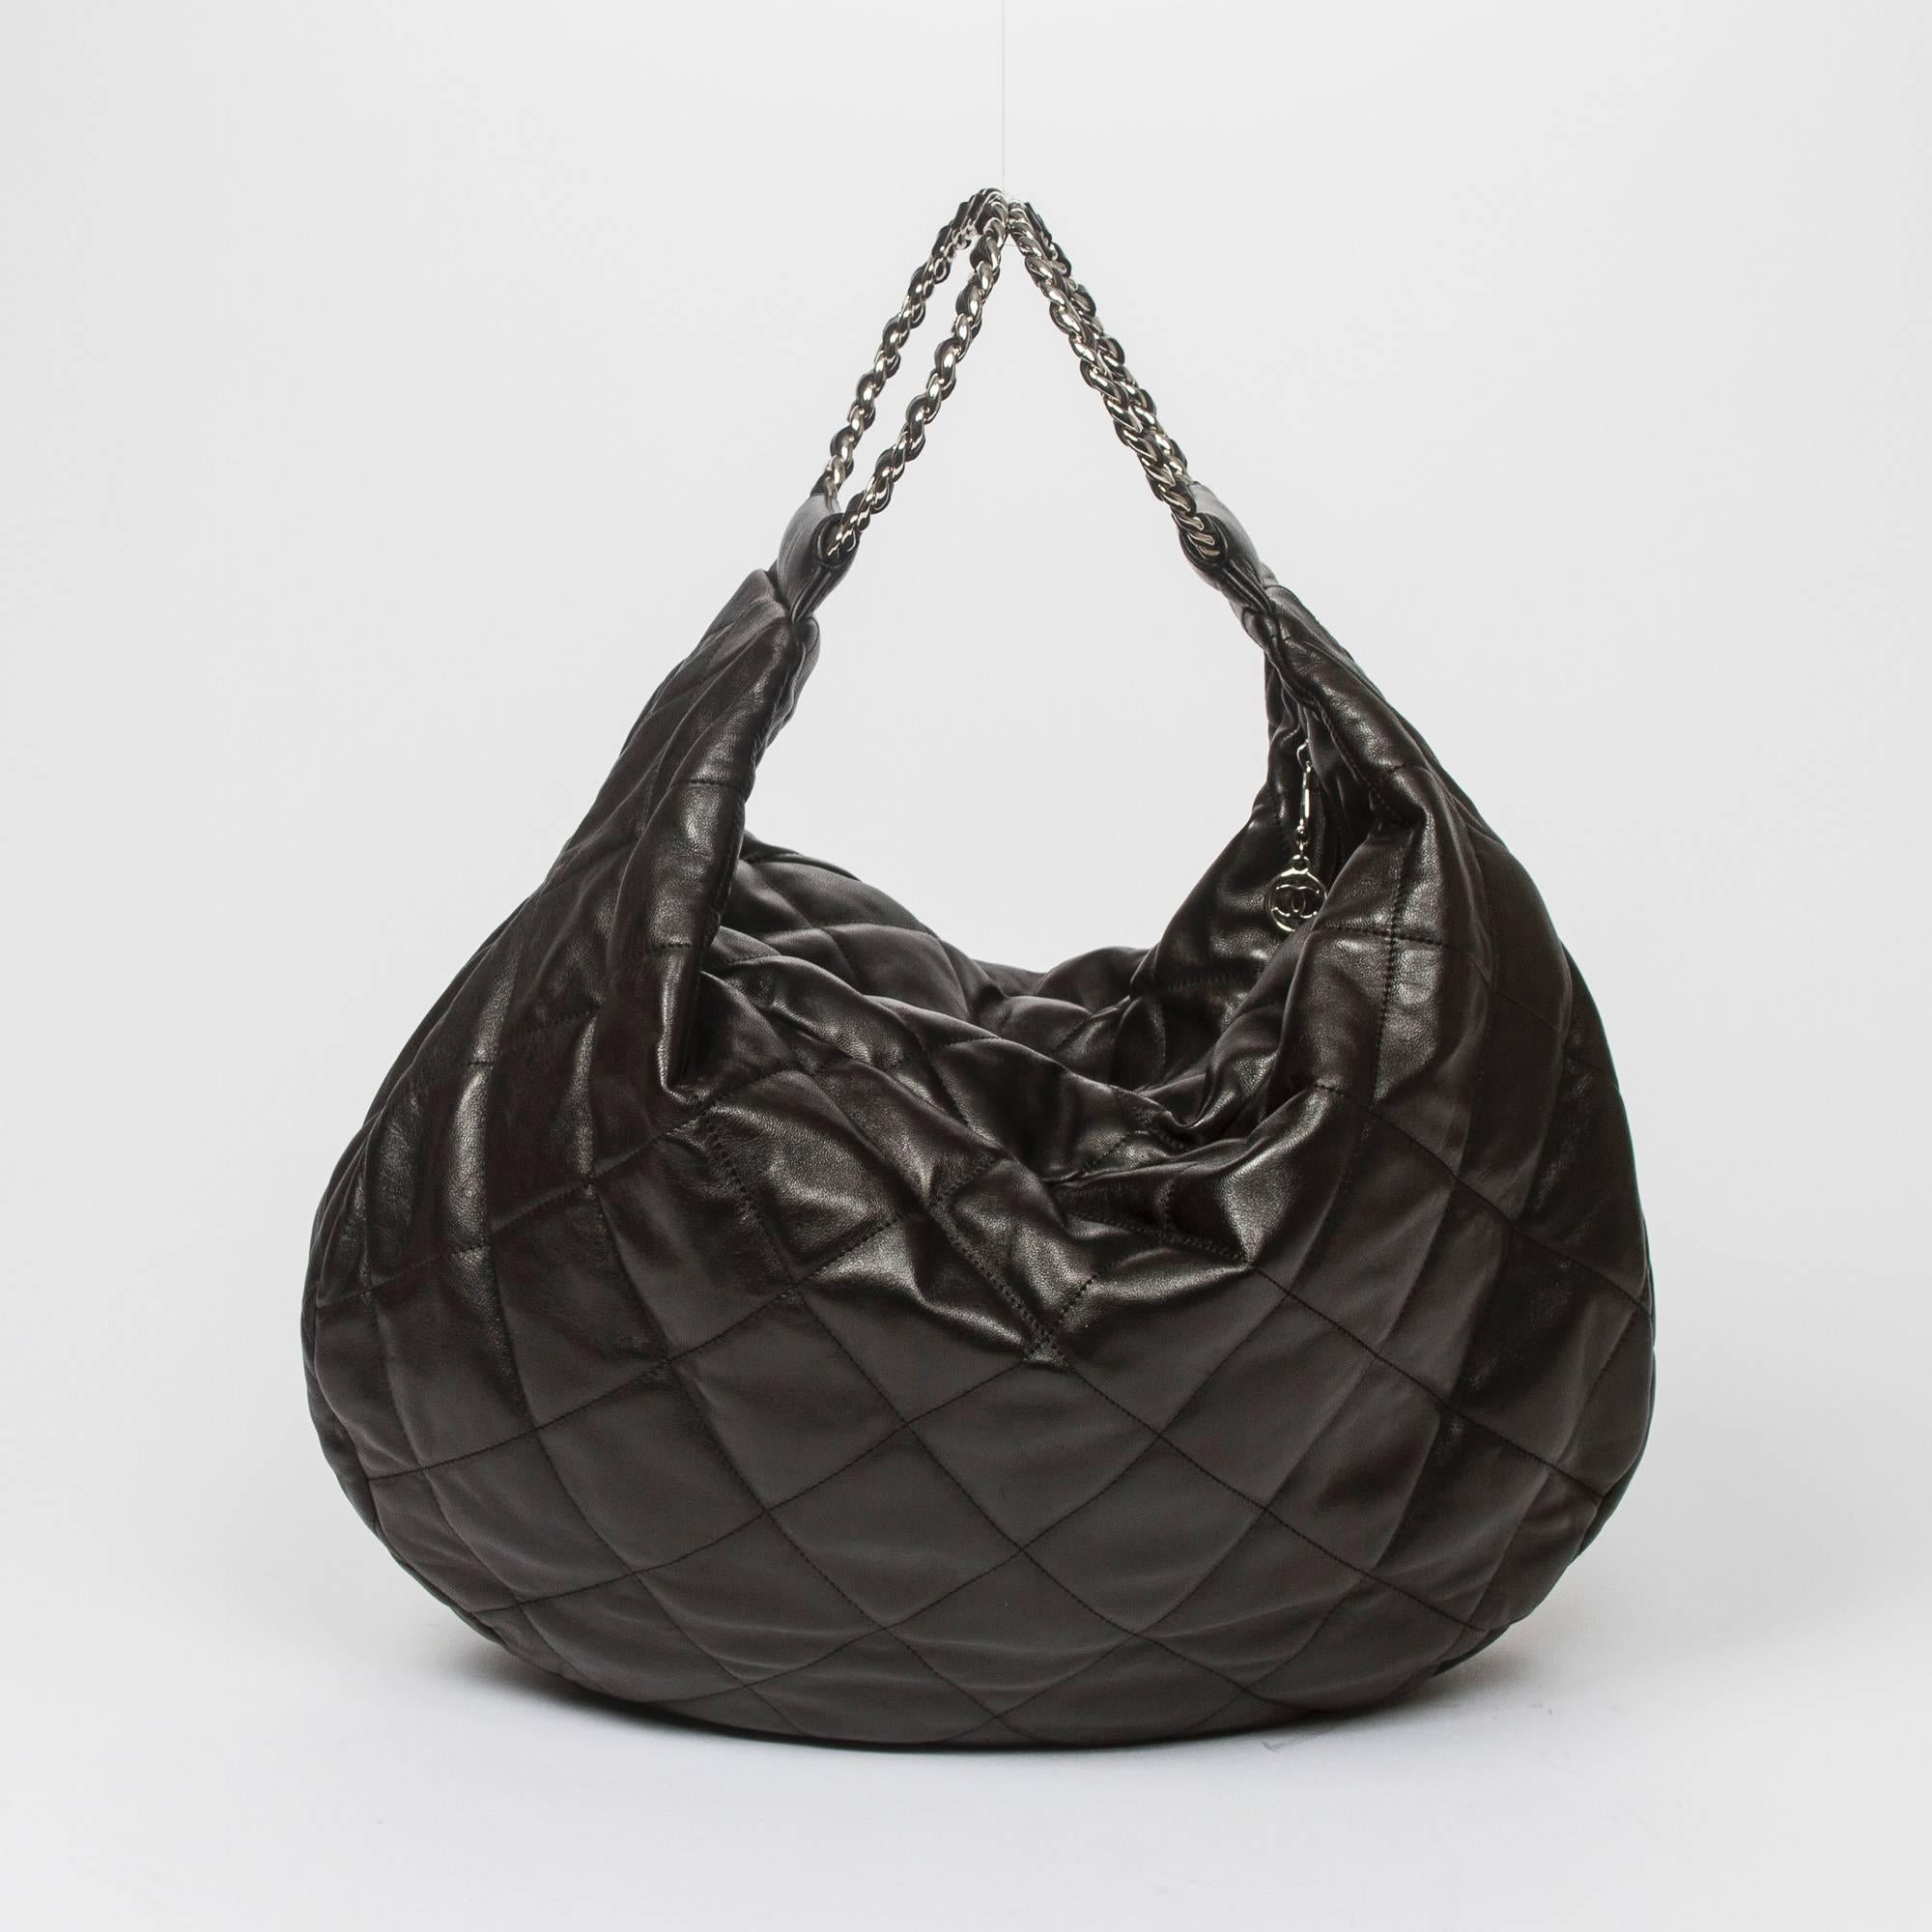 Women's Chanel Hobo Handbag Black Quilted leather